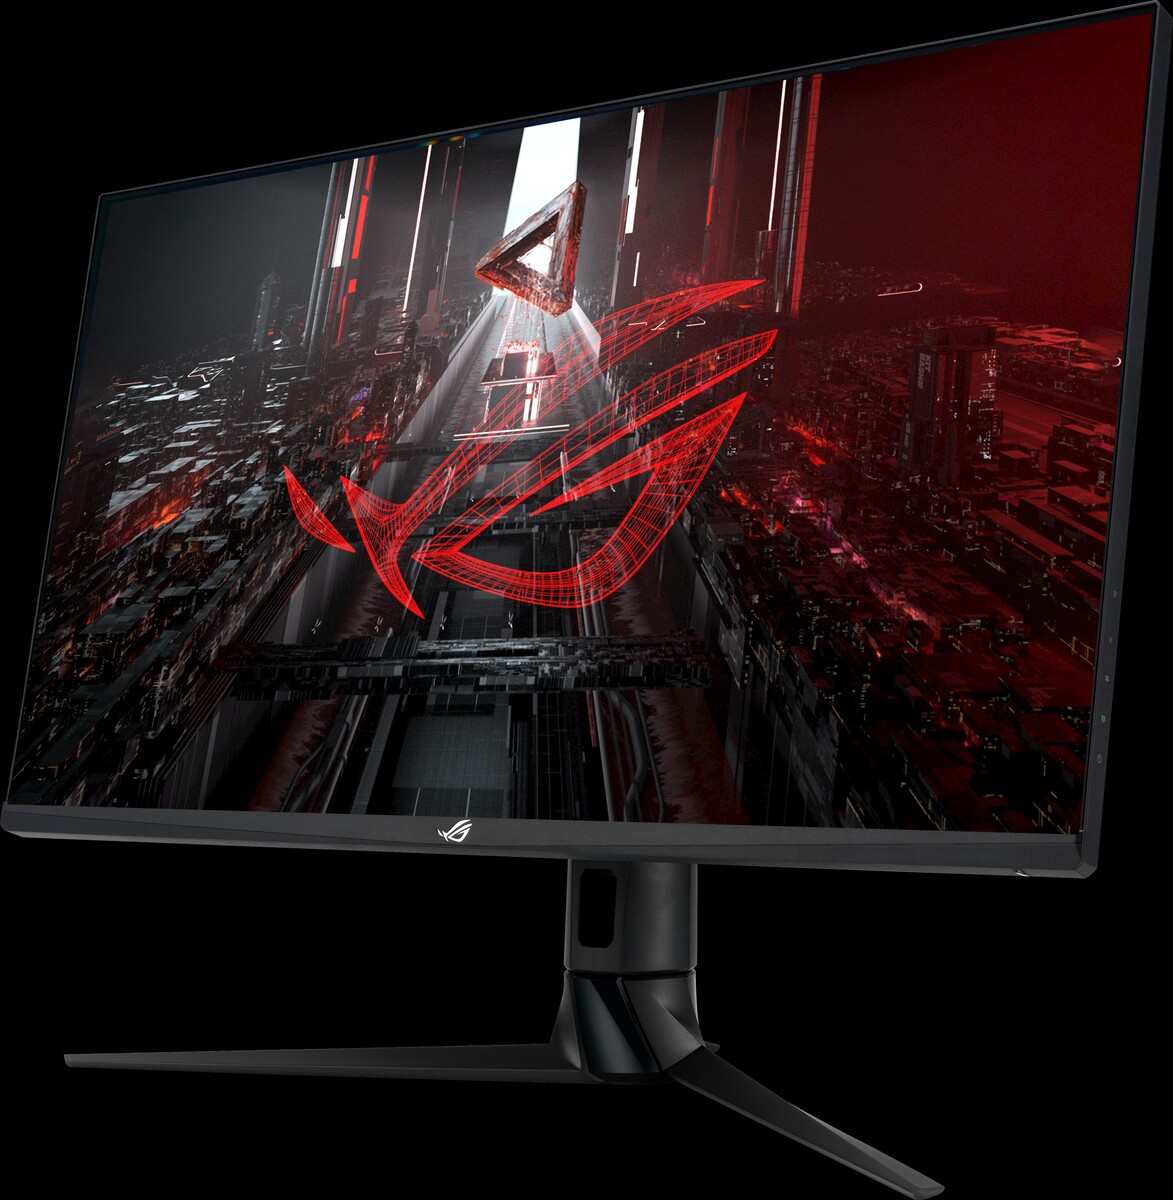 Asus introduces three new 4K 144 Hz monitors with HDMI 2.1 and an ultrafast  WQHD 240 Hz display for gamers -  News